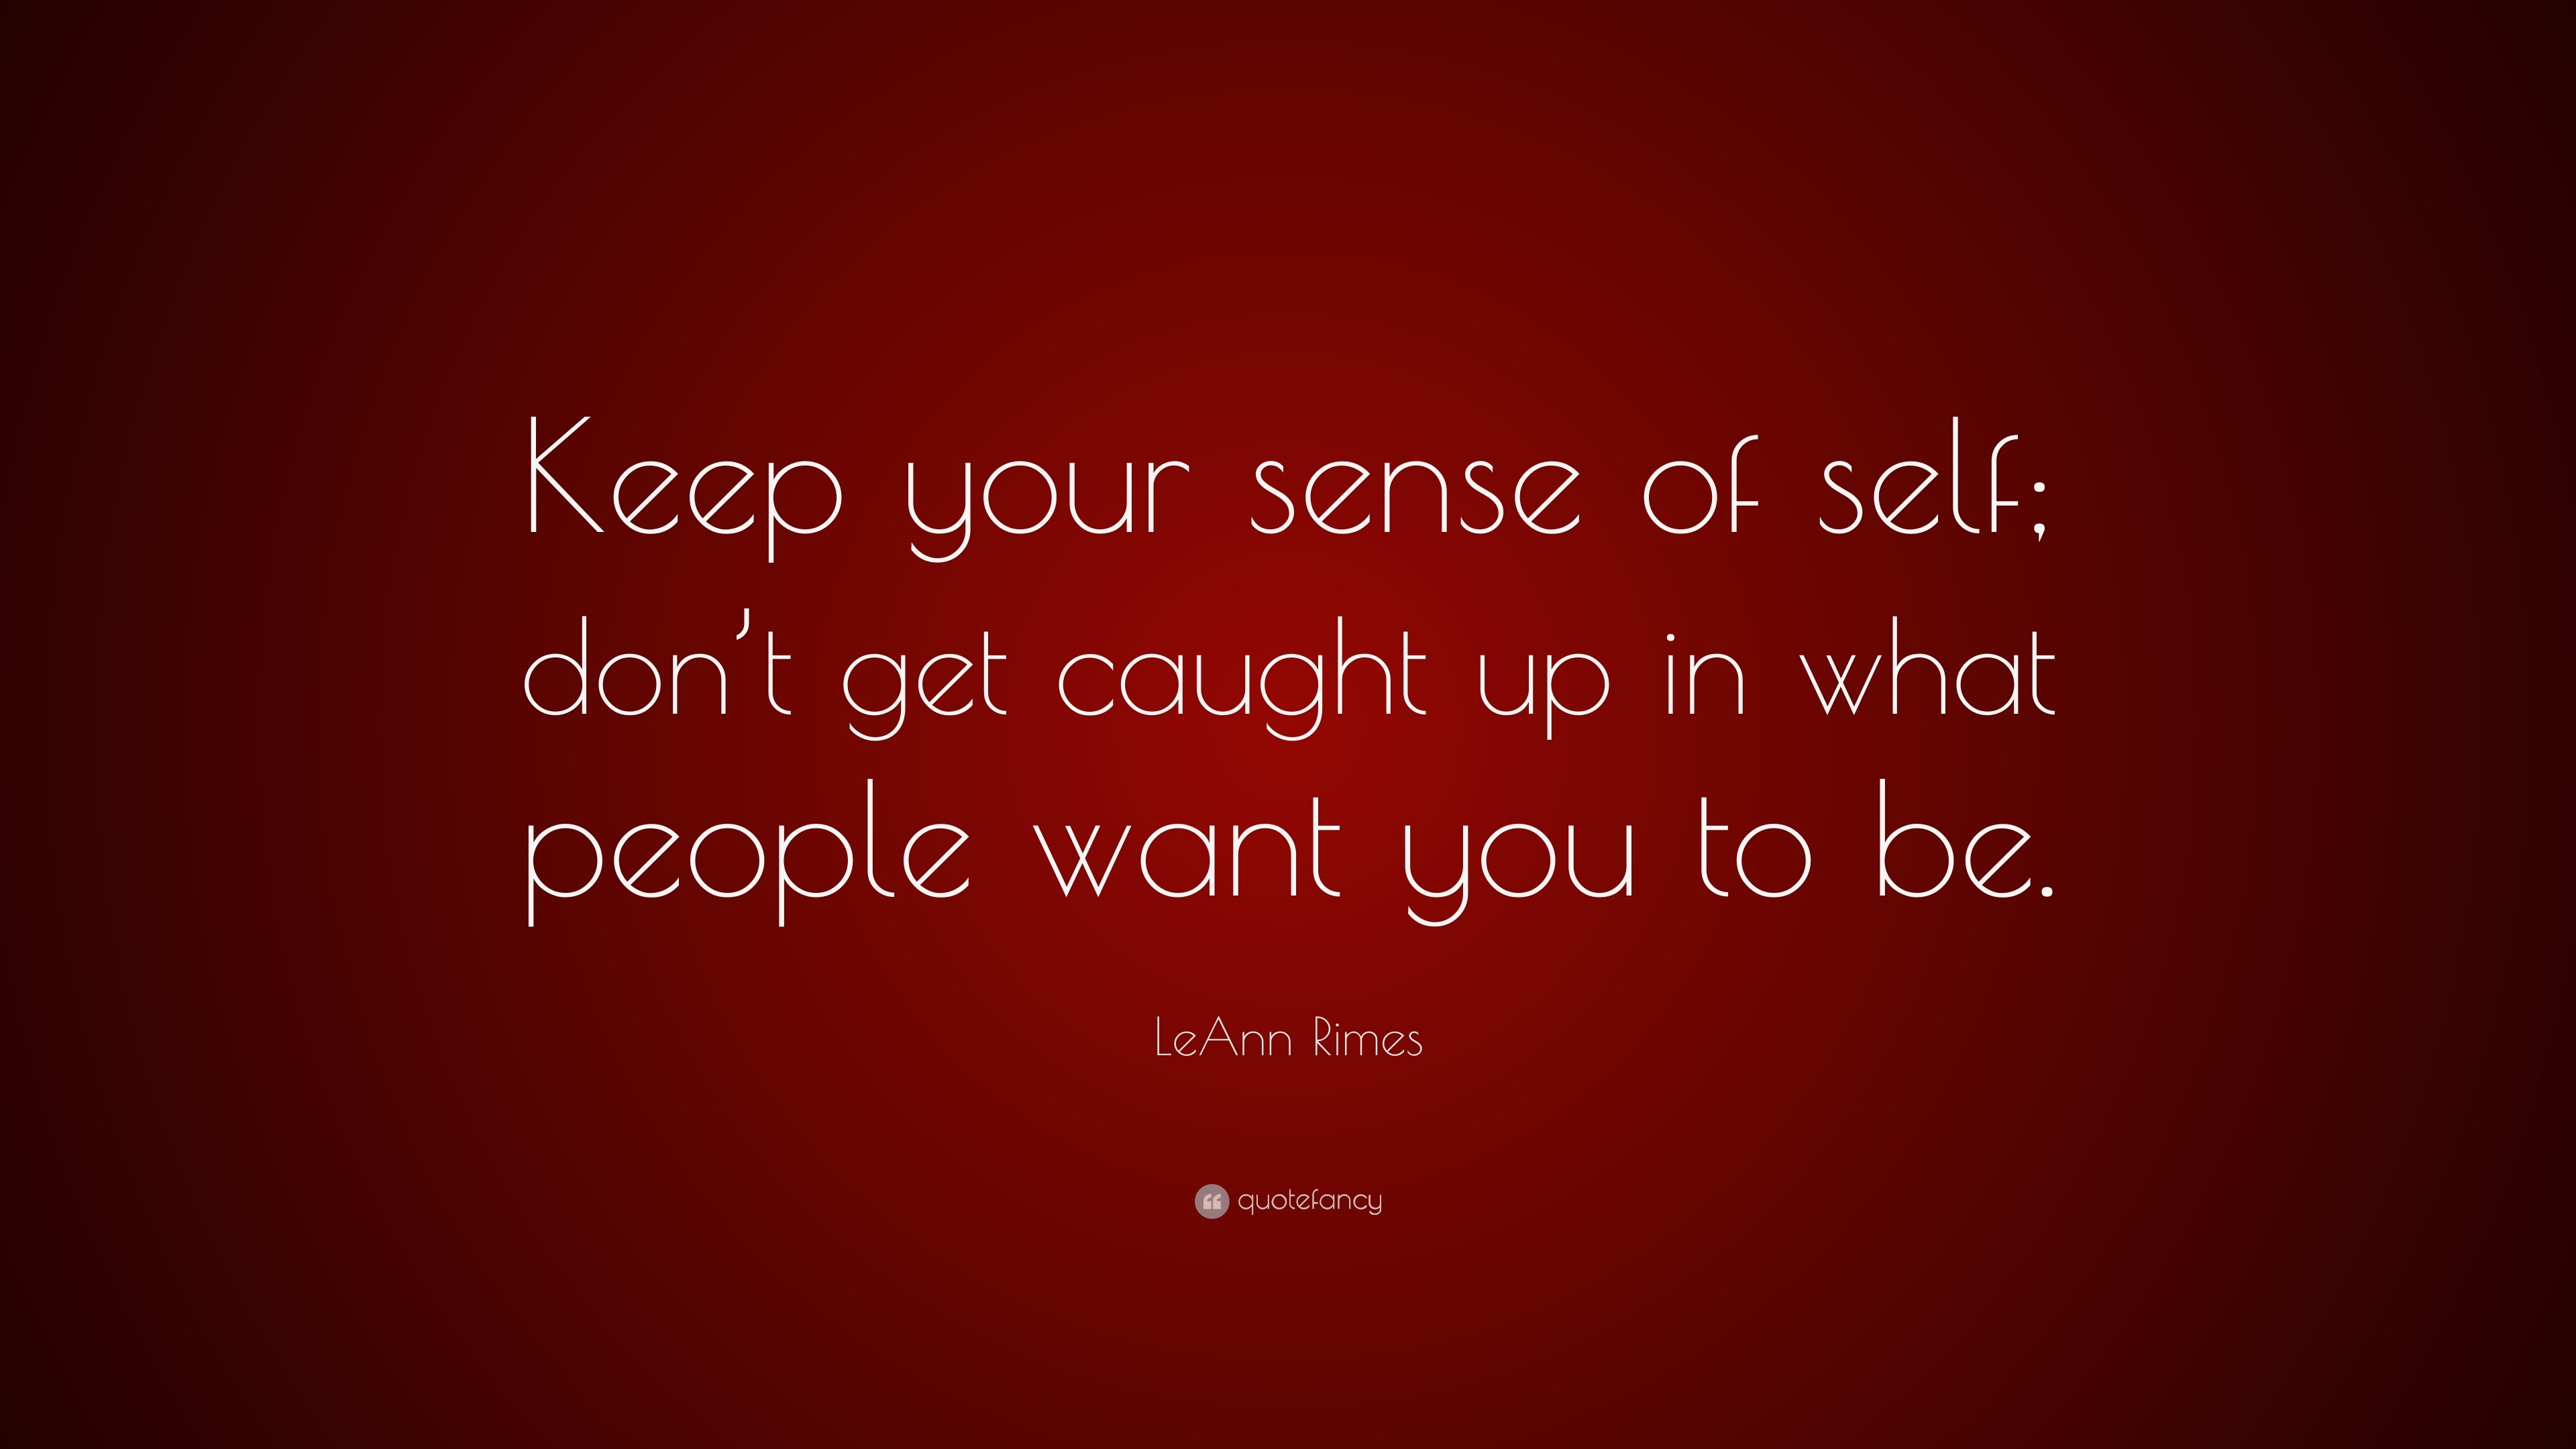 Leann Rimes Quote “keep Your Sense Of Self Dont Get Caught Up In What People Want You To Be” 